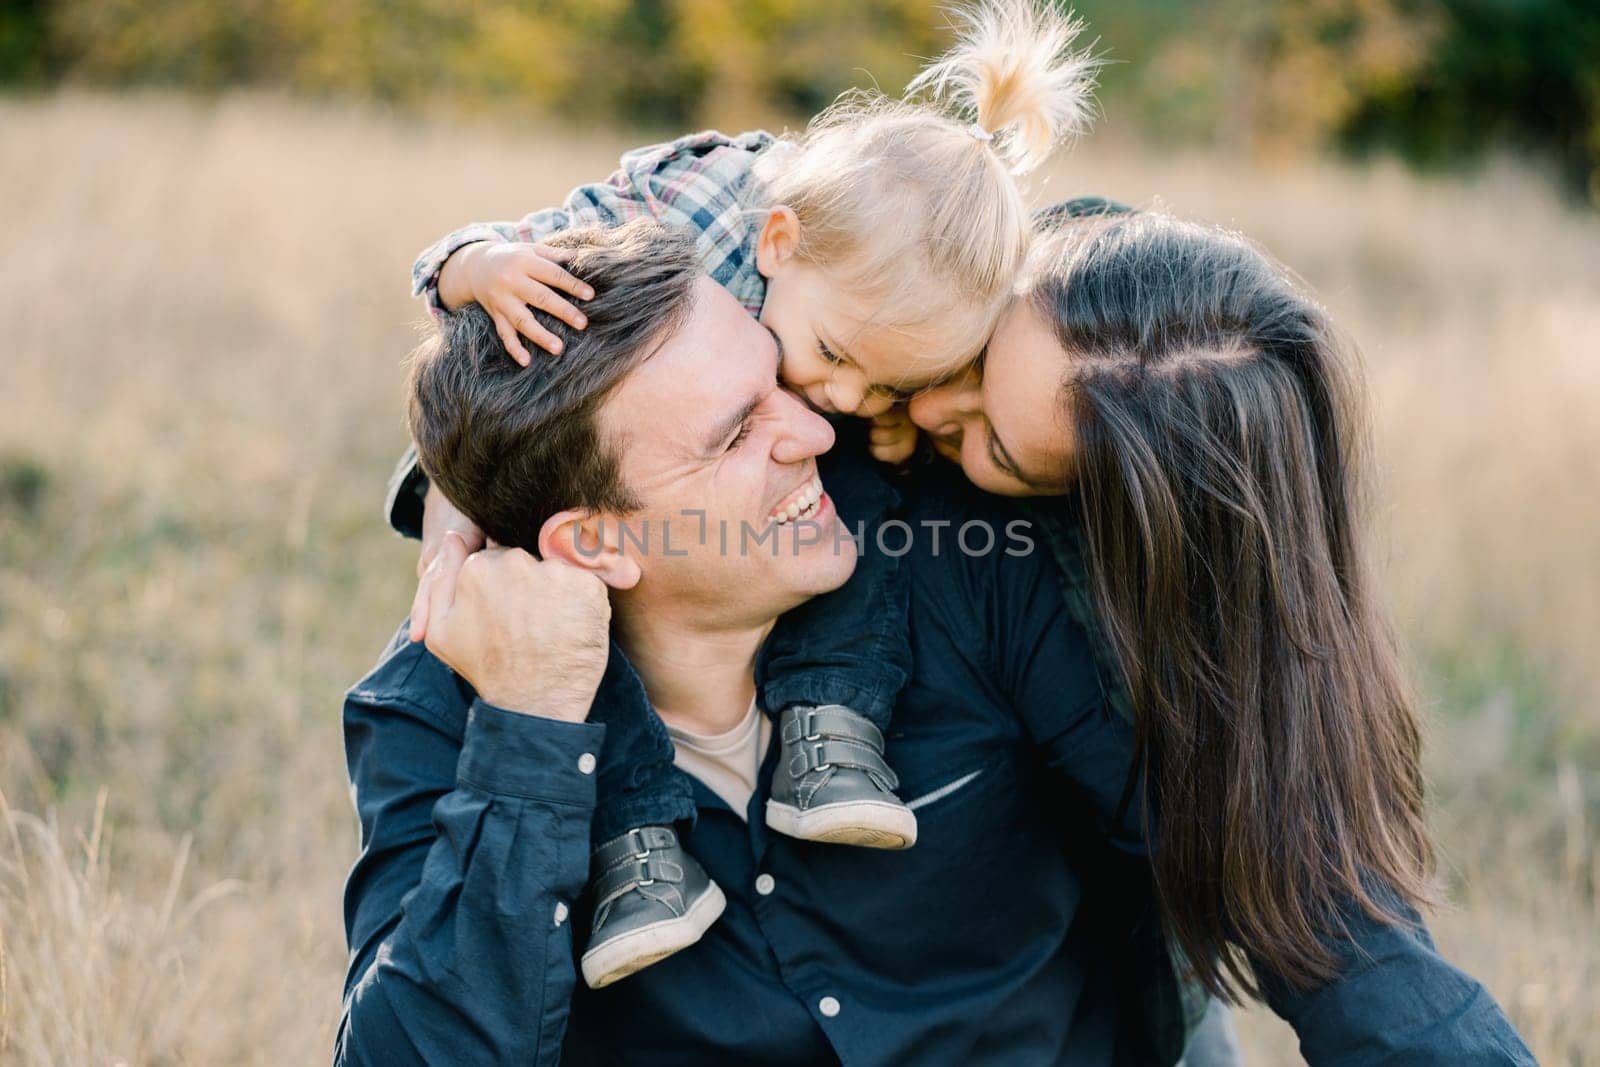 Mom with a little girl on the shoulders of dad kiss him, hugging from behind by Nadtochiy